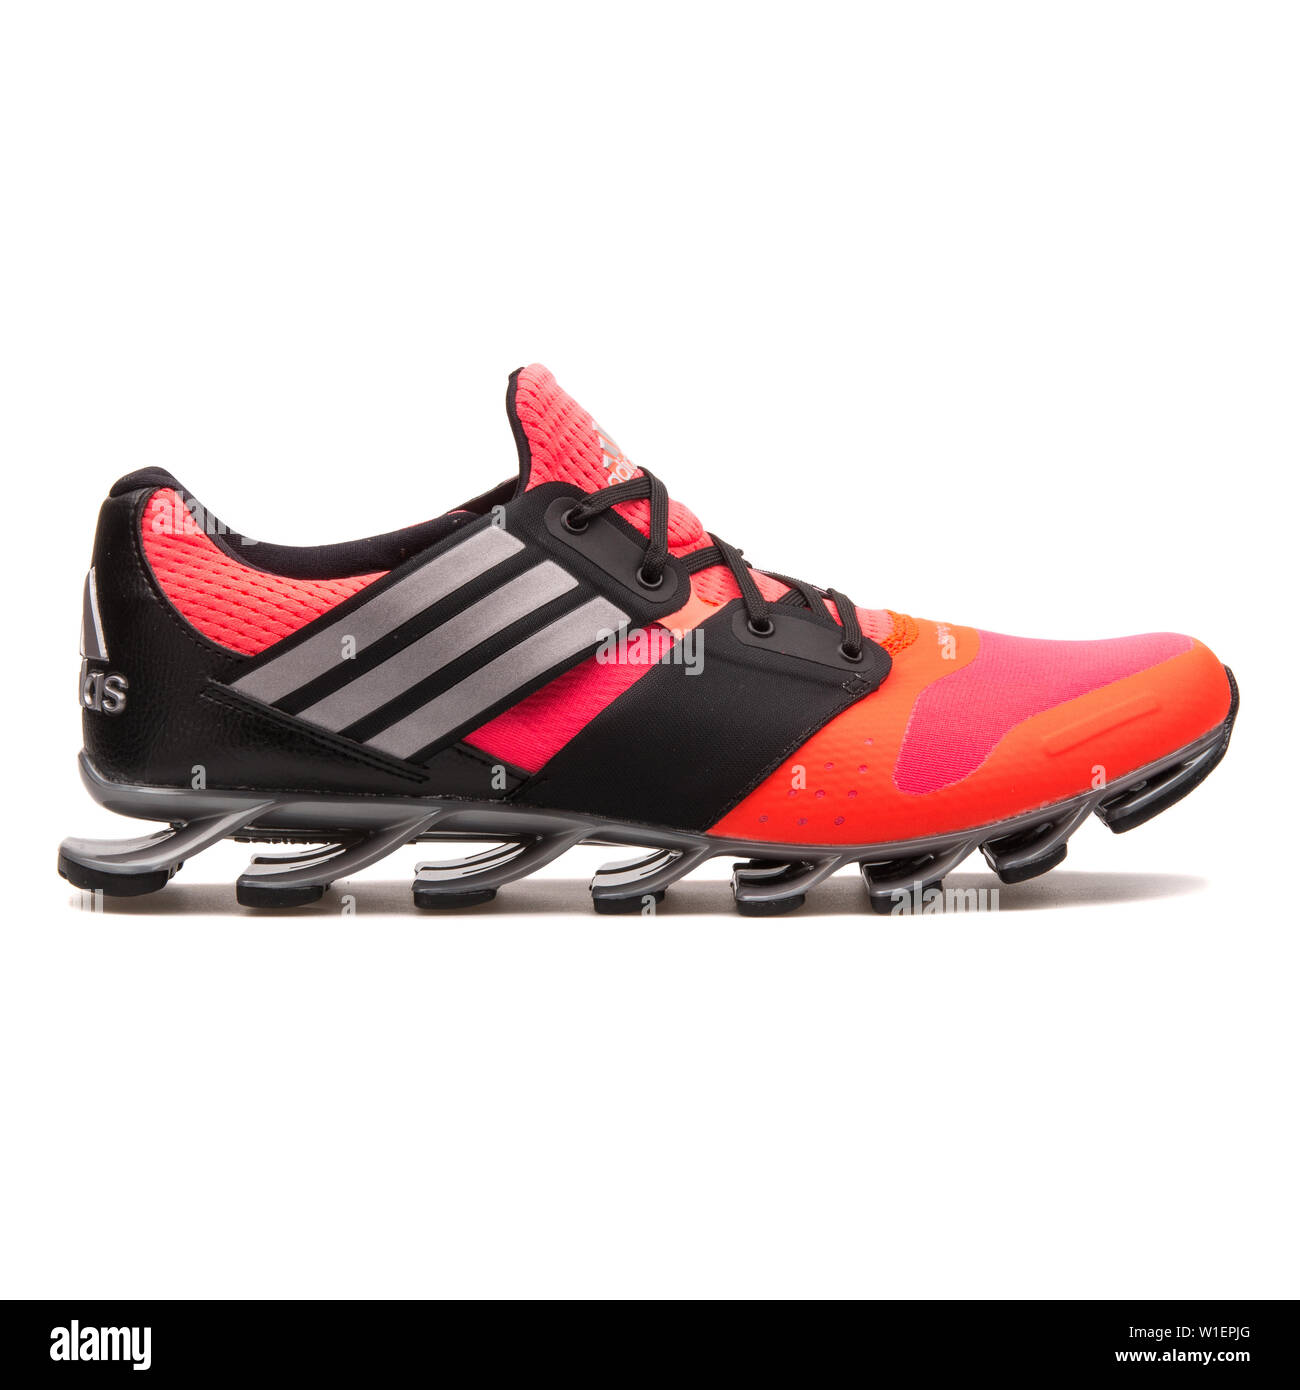 Tom Audreath Absoluto Sembrar VIENNA, AUSTRIA - AUGUST 10, 2017: Adidas Springblade Solyce red and black  sneaker on white background Stock Photo - Alamy